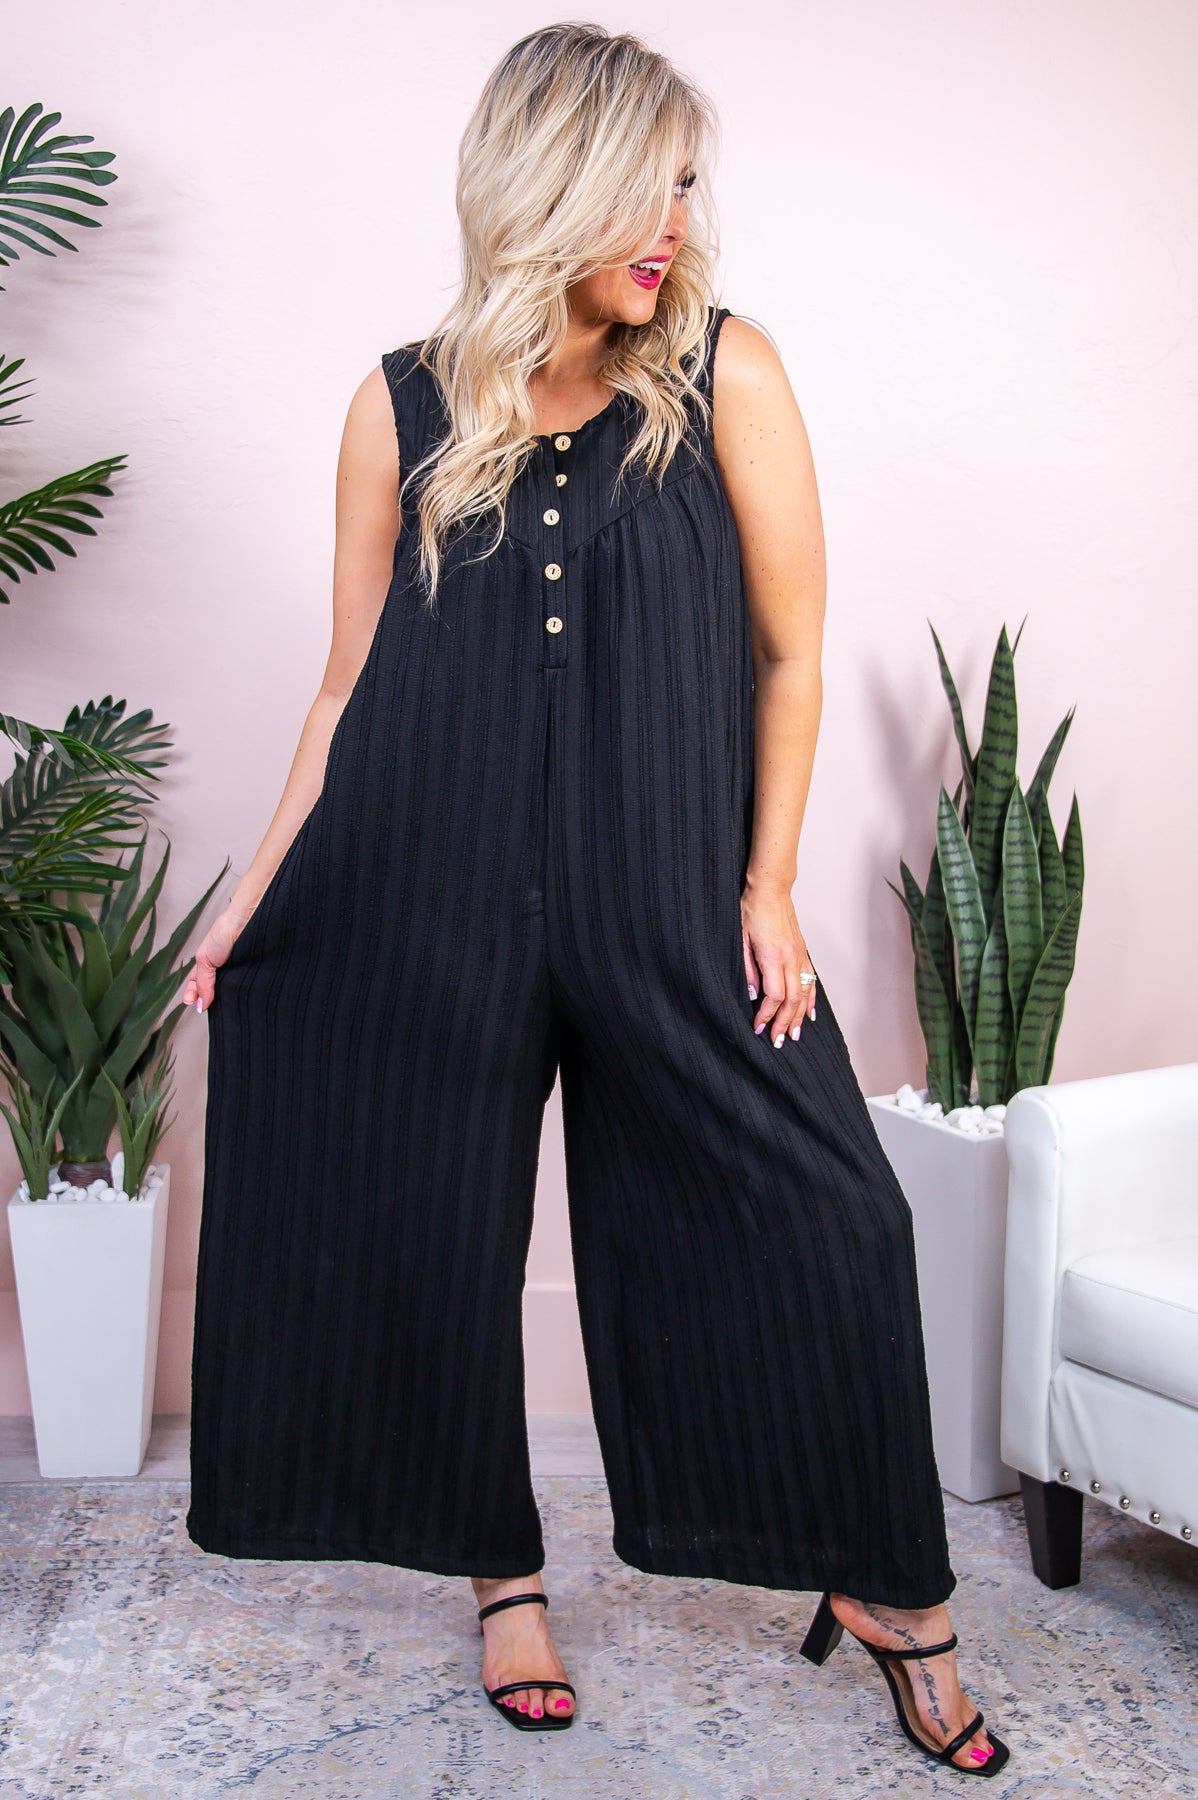 Storms Are Brewing Black Solid Romper - RMP740BK